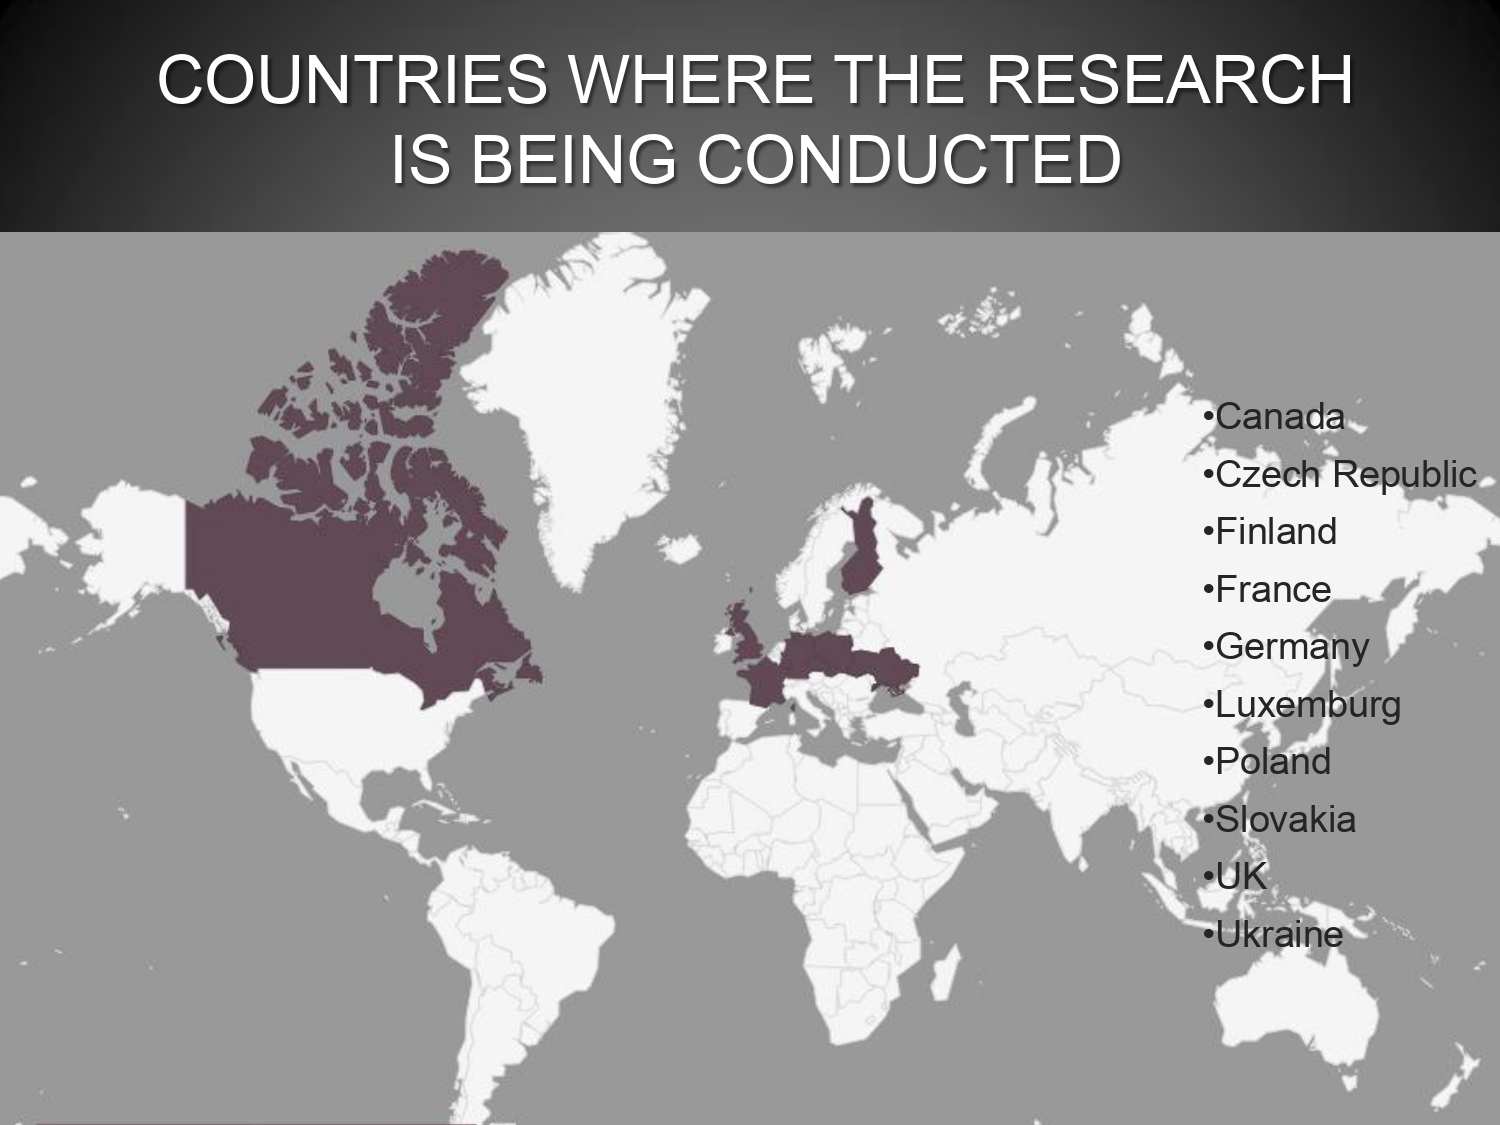 Countries where research is being conducted